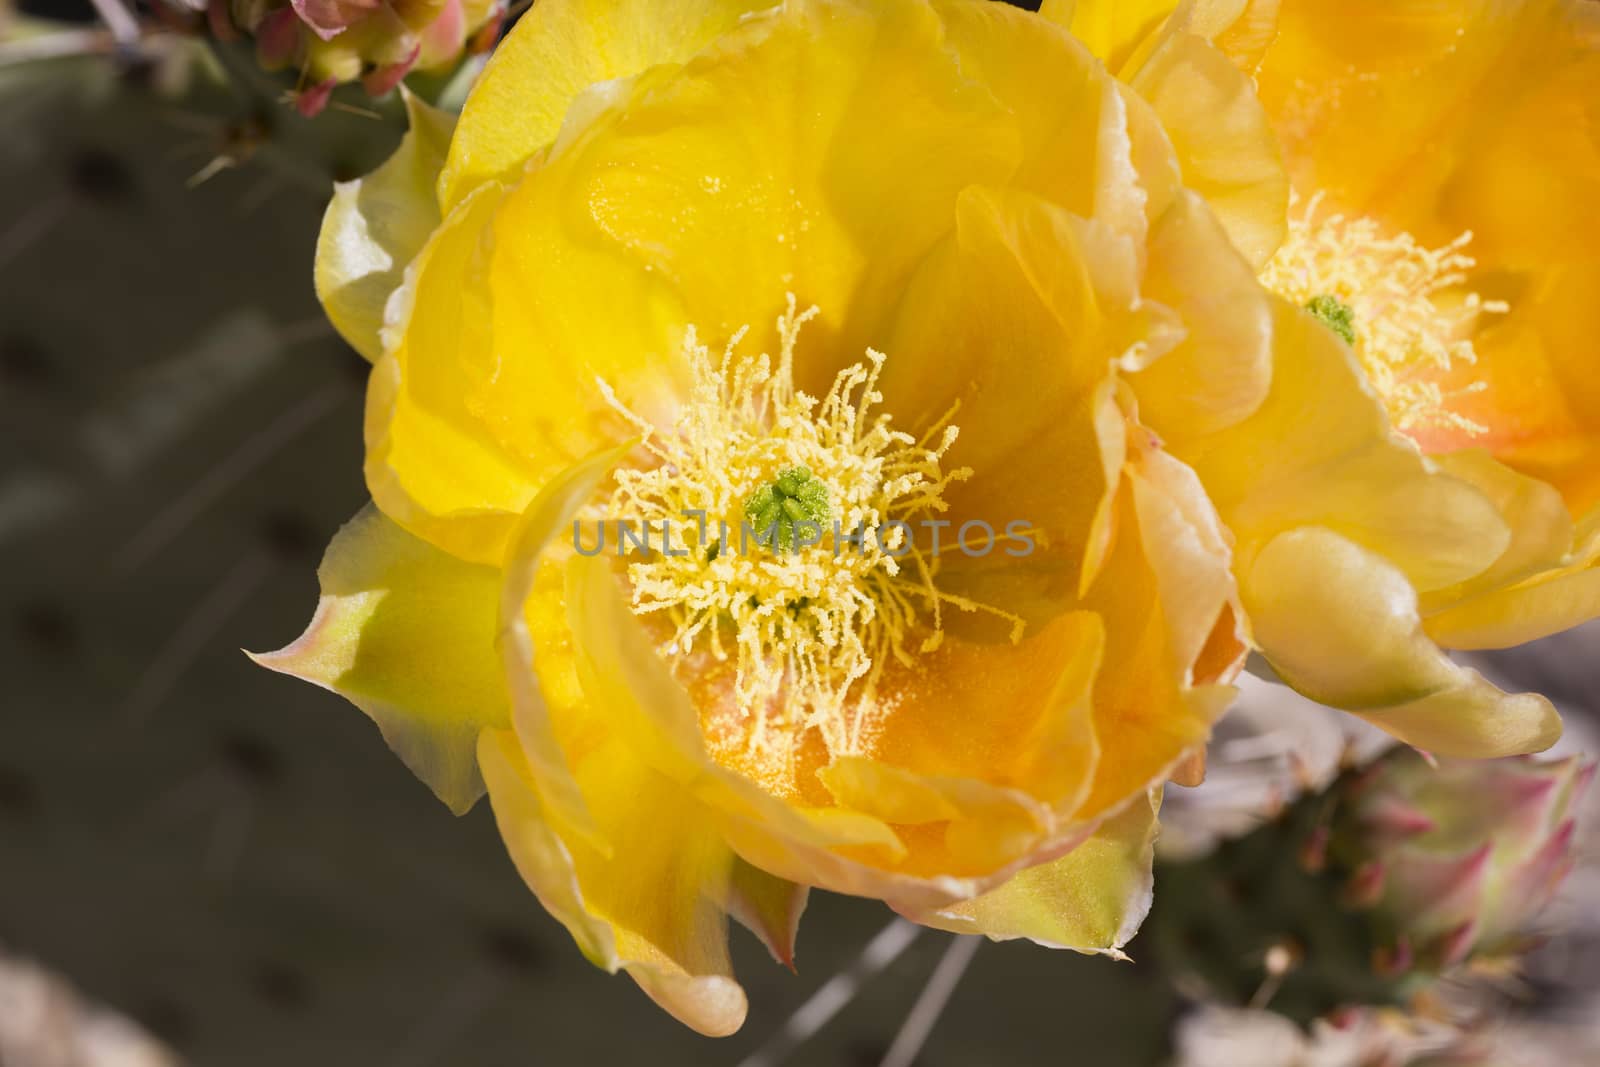 Yellow flower of prickly pear cactus in elegant close up.  Location is Saguaro National Park, East division, along Cactus Forest Drive.  